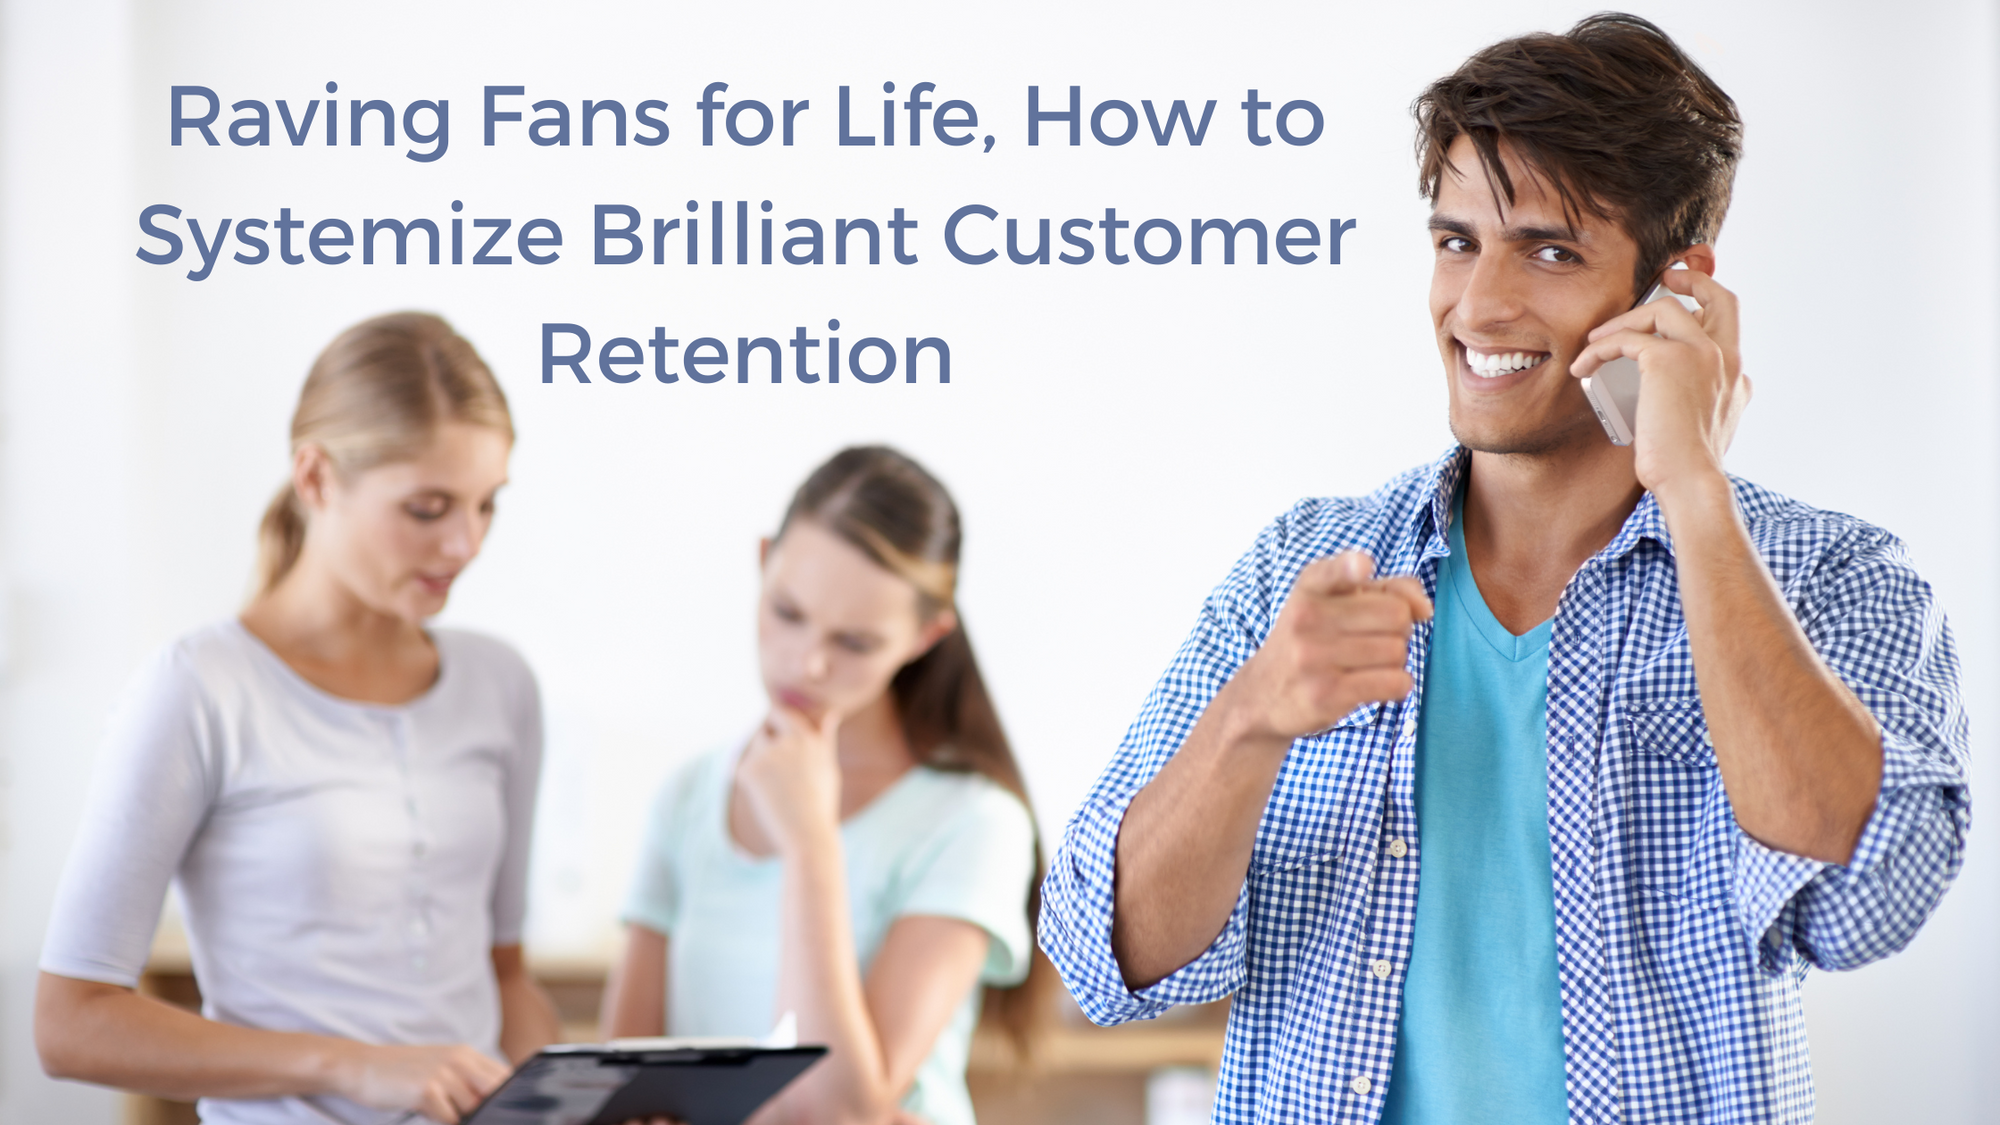 Raving Fans for Life, How to Systemize Brilliant Customer Retention